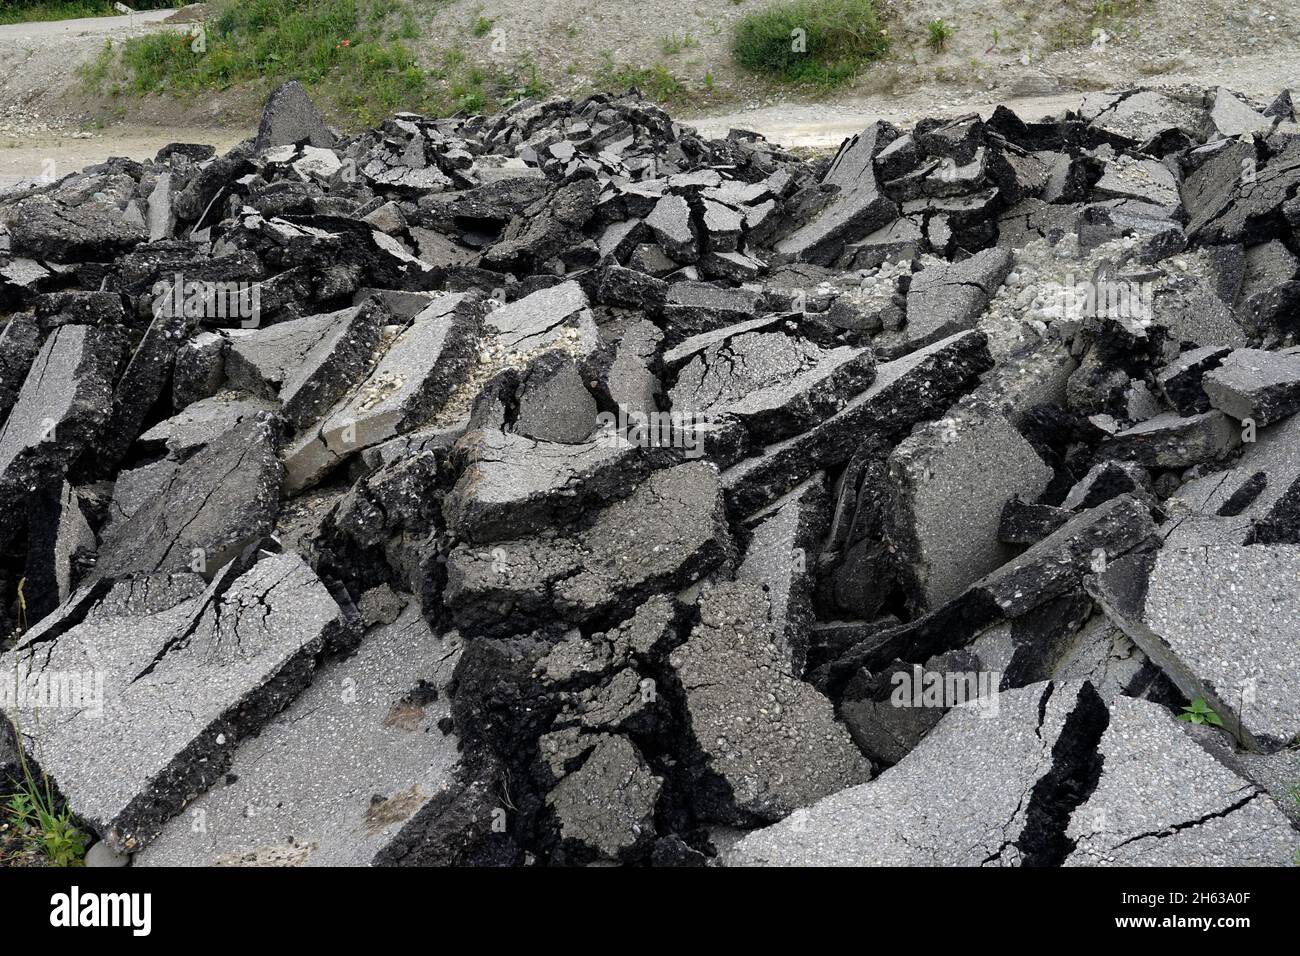 germany,bavaria,storage place,recycling,road construction,removed asphalt,pieces of tar,asphalt breakage Stock Photo